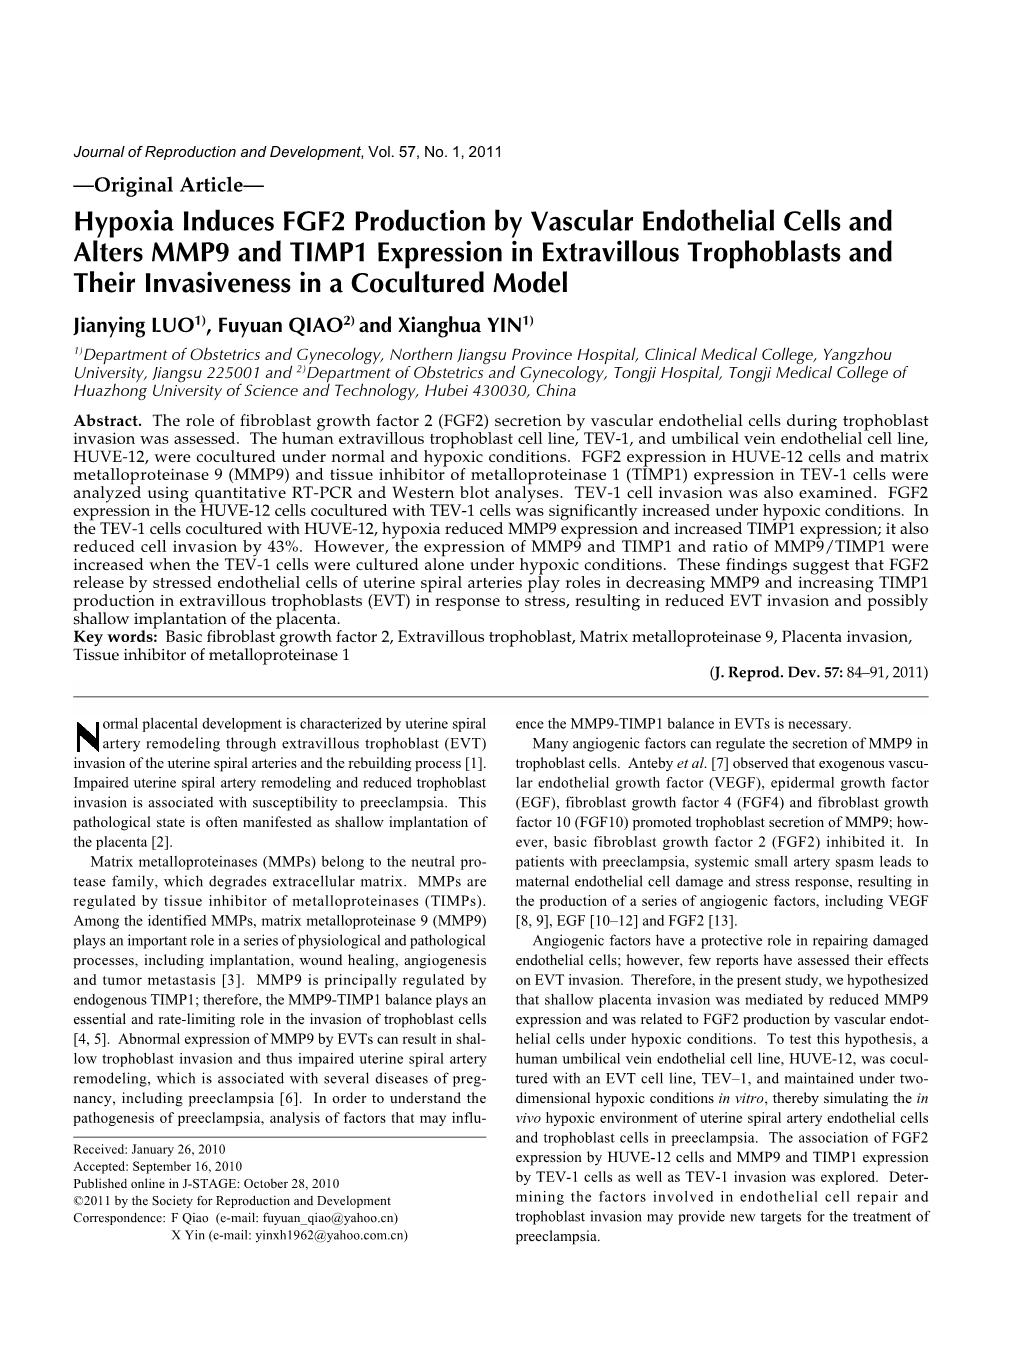 Hypoxia Induces FGF2 Production by Vascular Endothelial Cells And